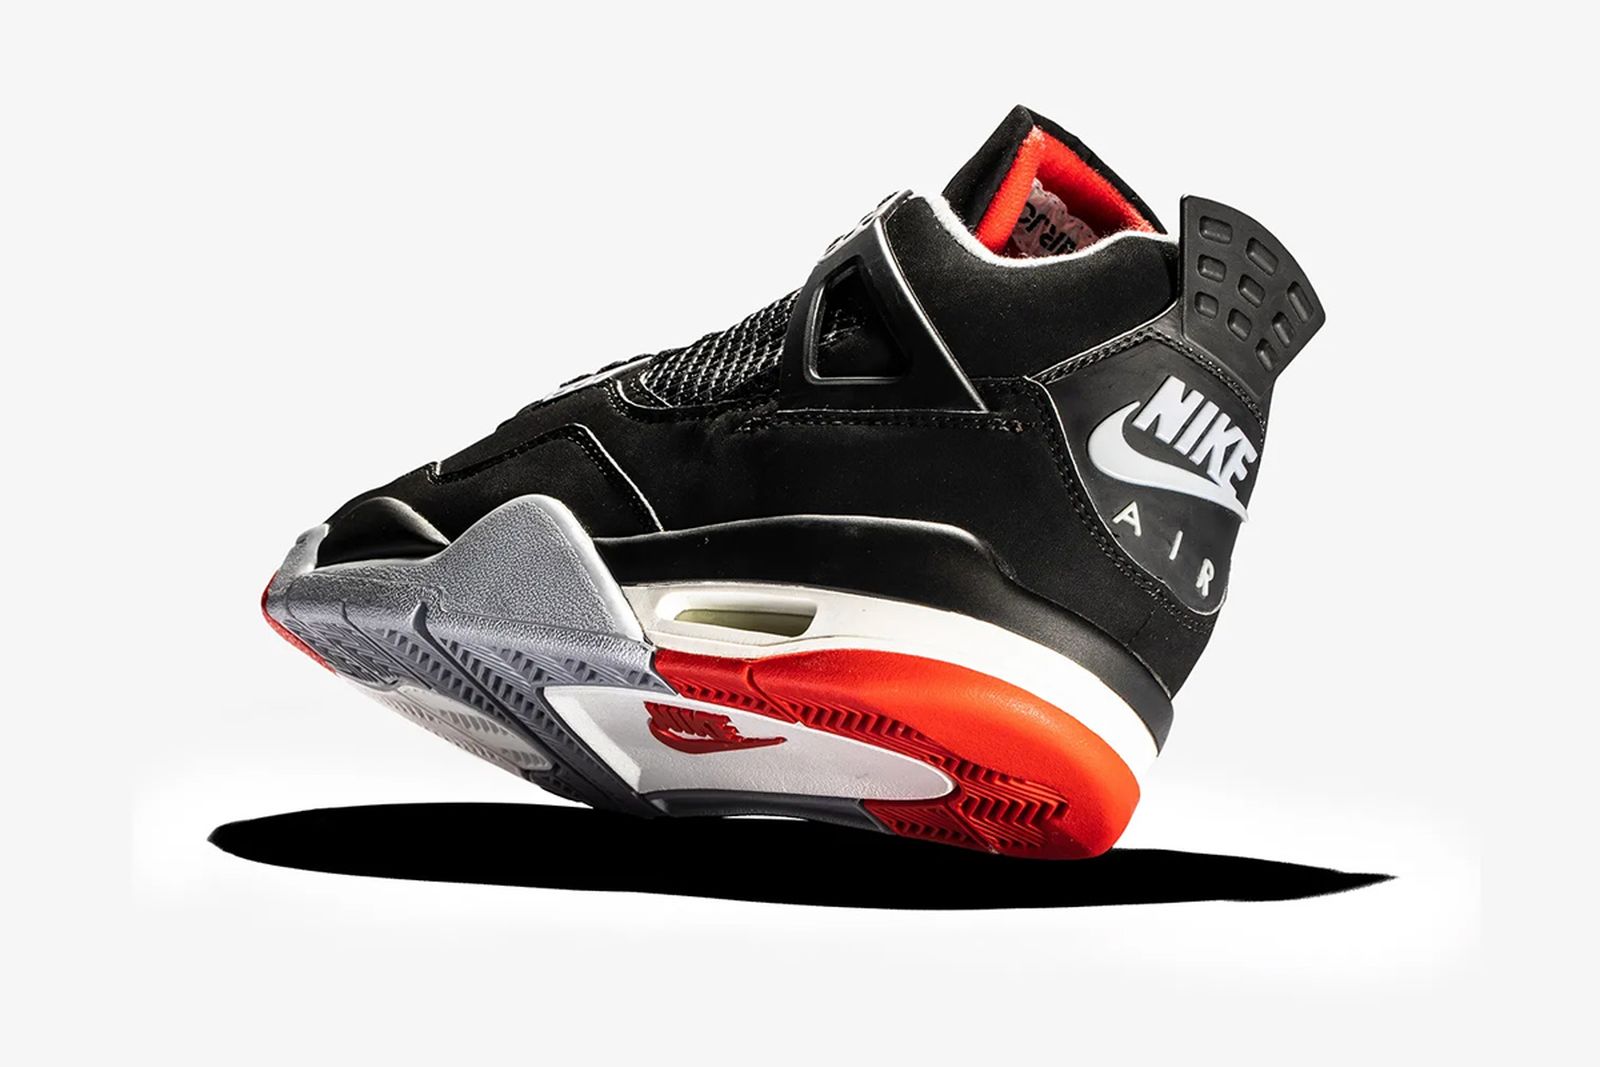 Nike Compares All 5 Versions of the Nike Air Jordan 4 “Bred”